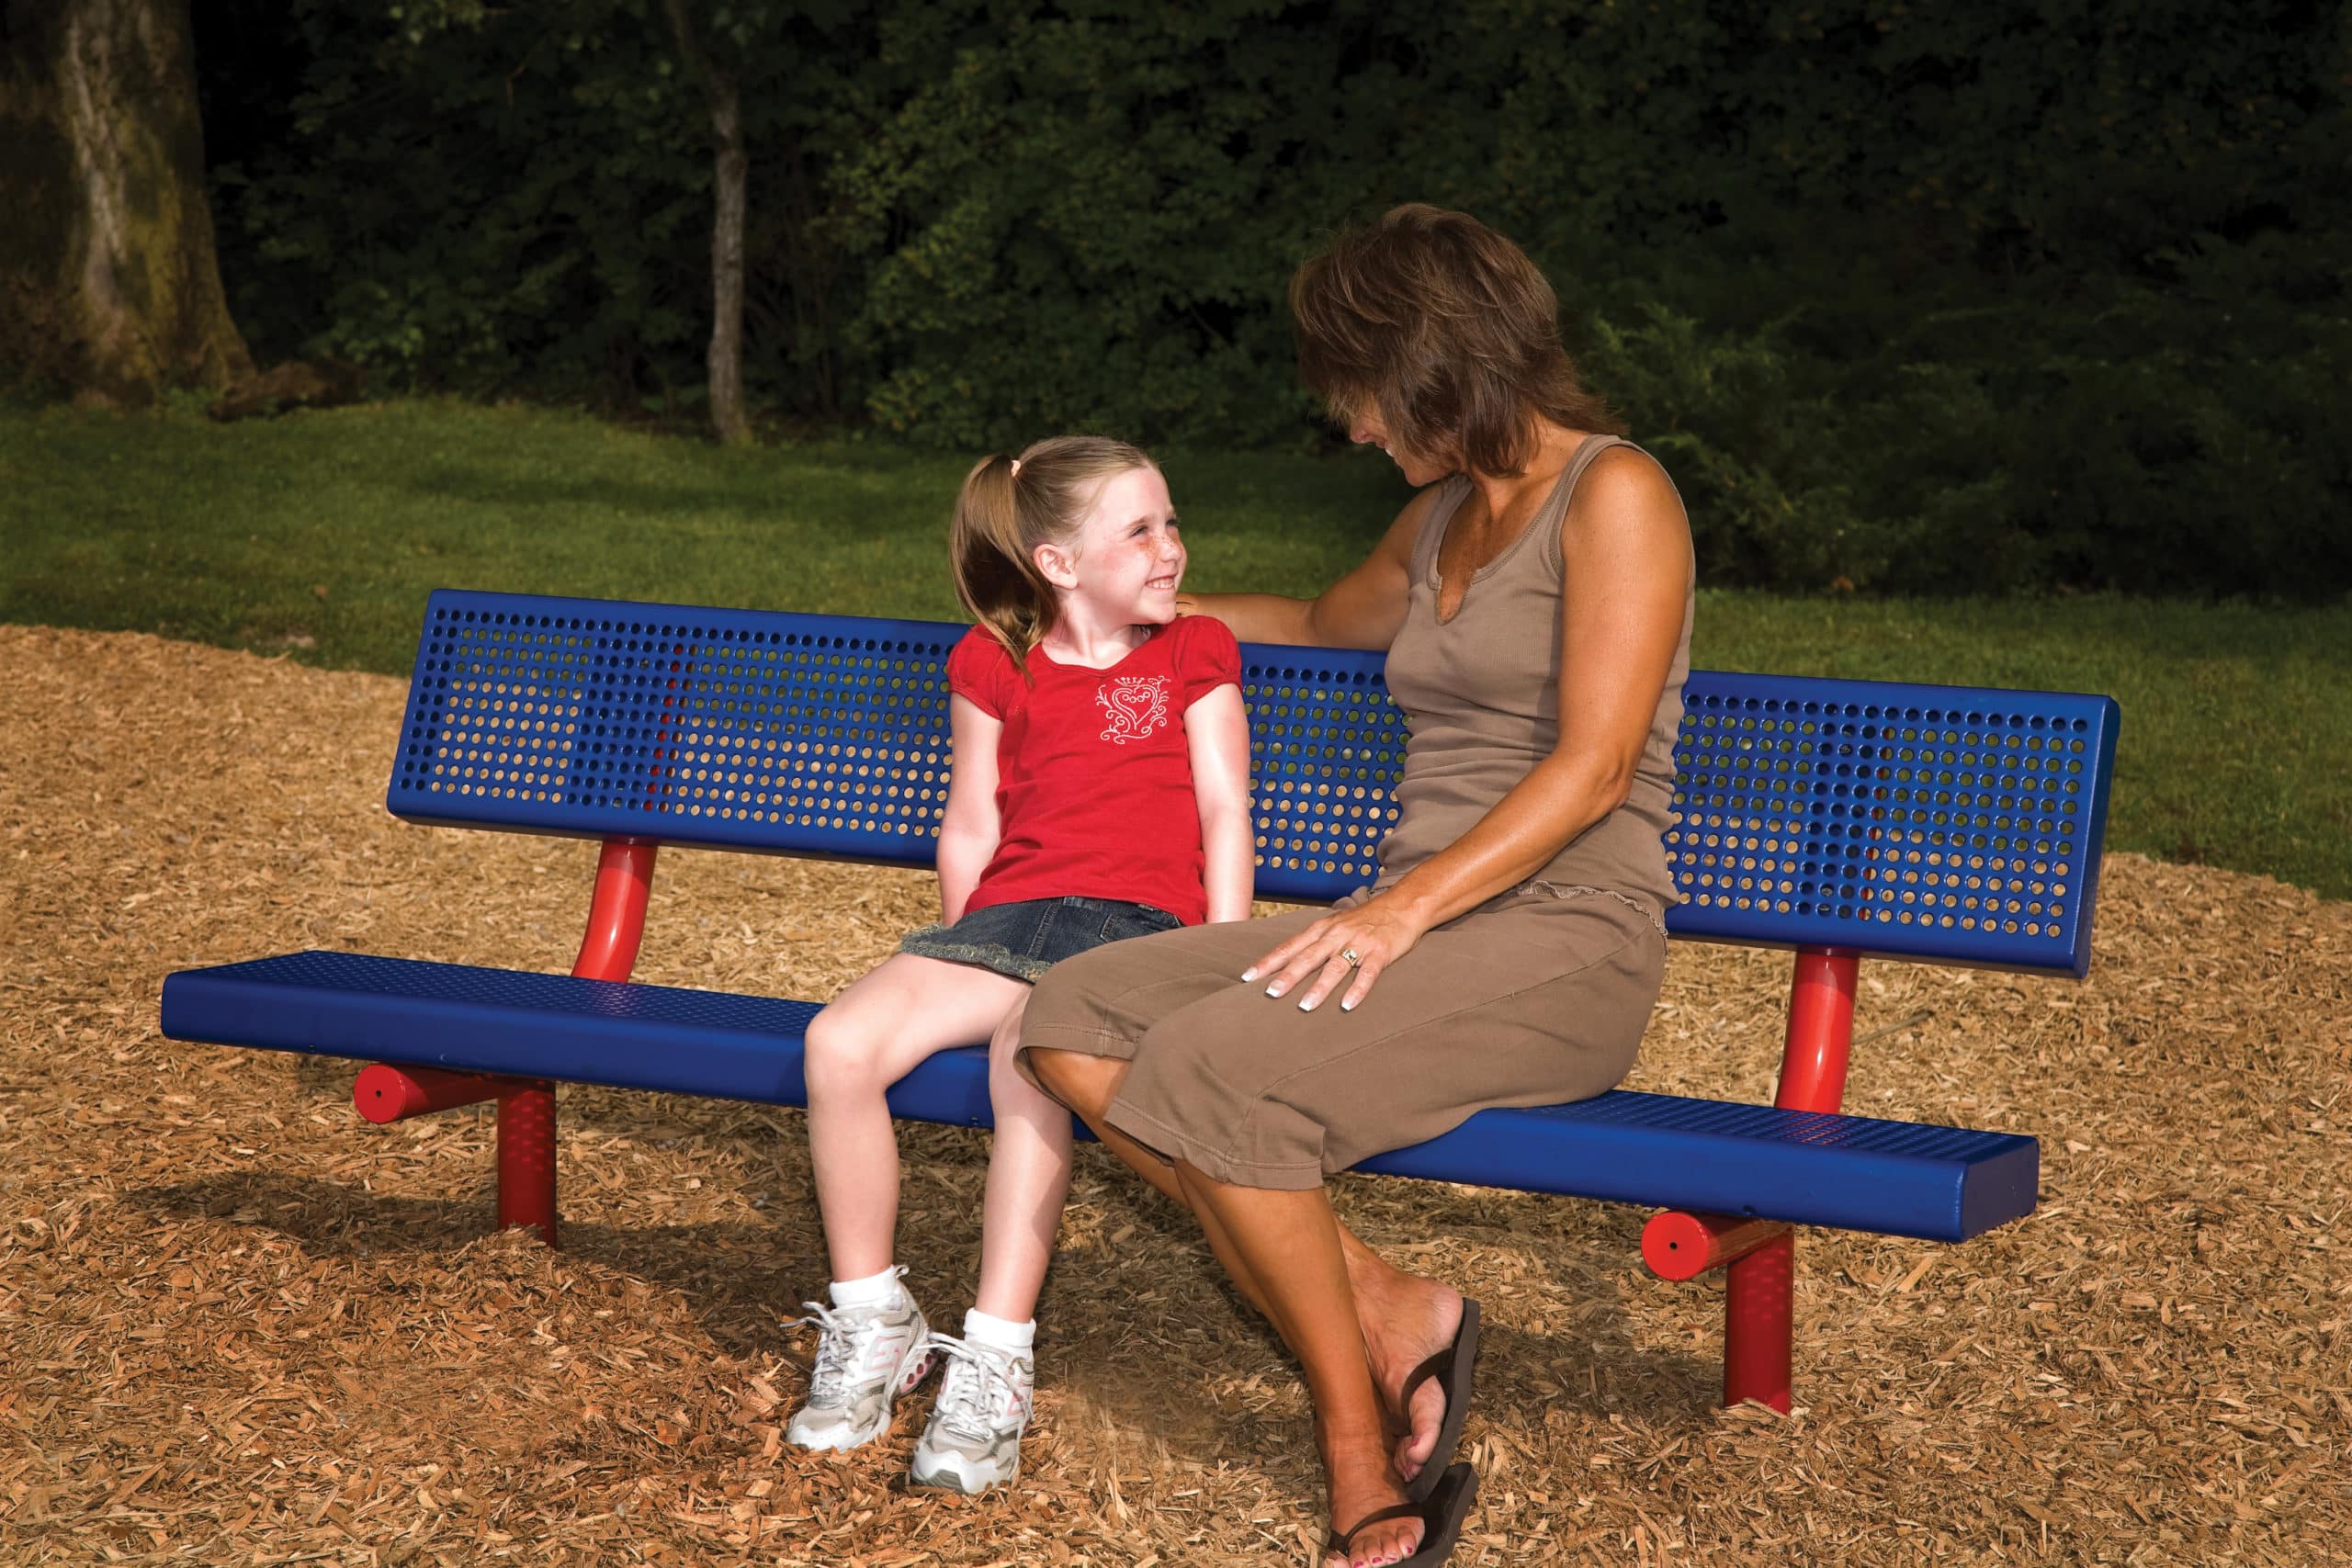 Woman and little girl sitting on a blue and red park bench